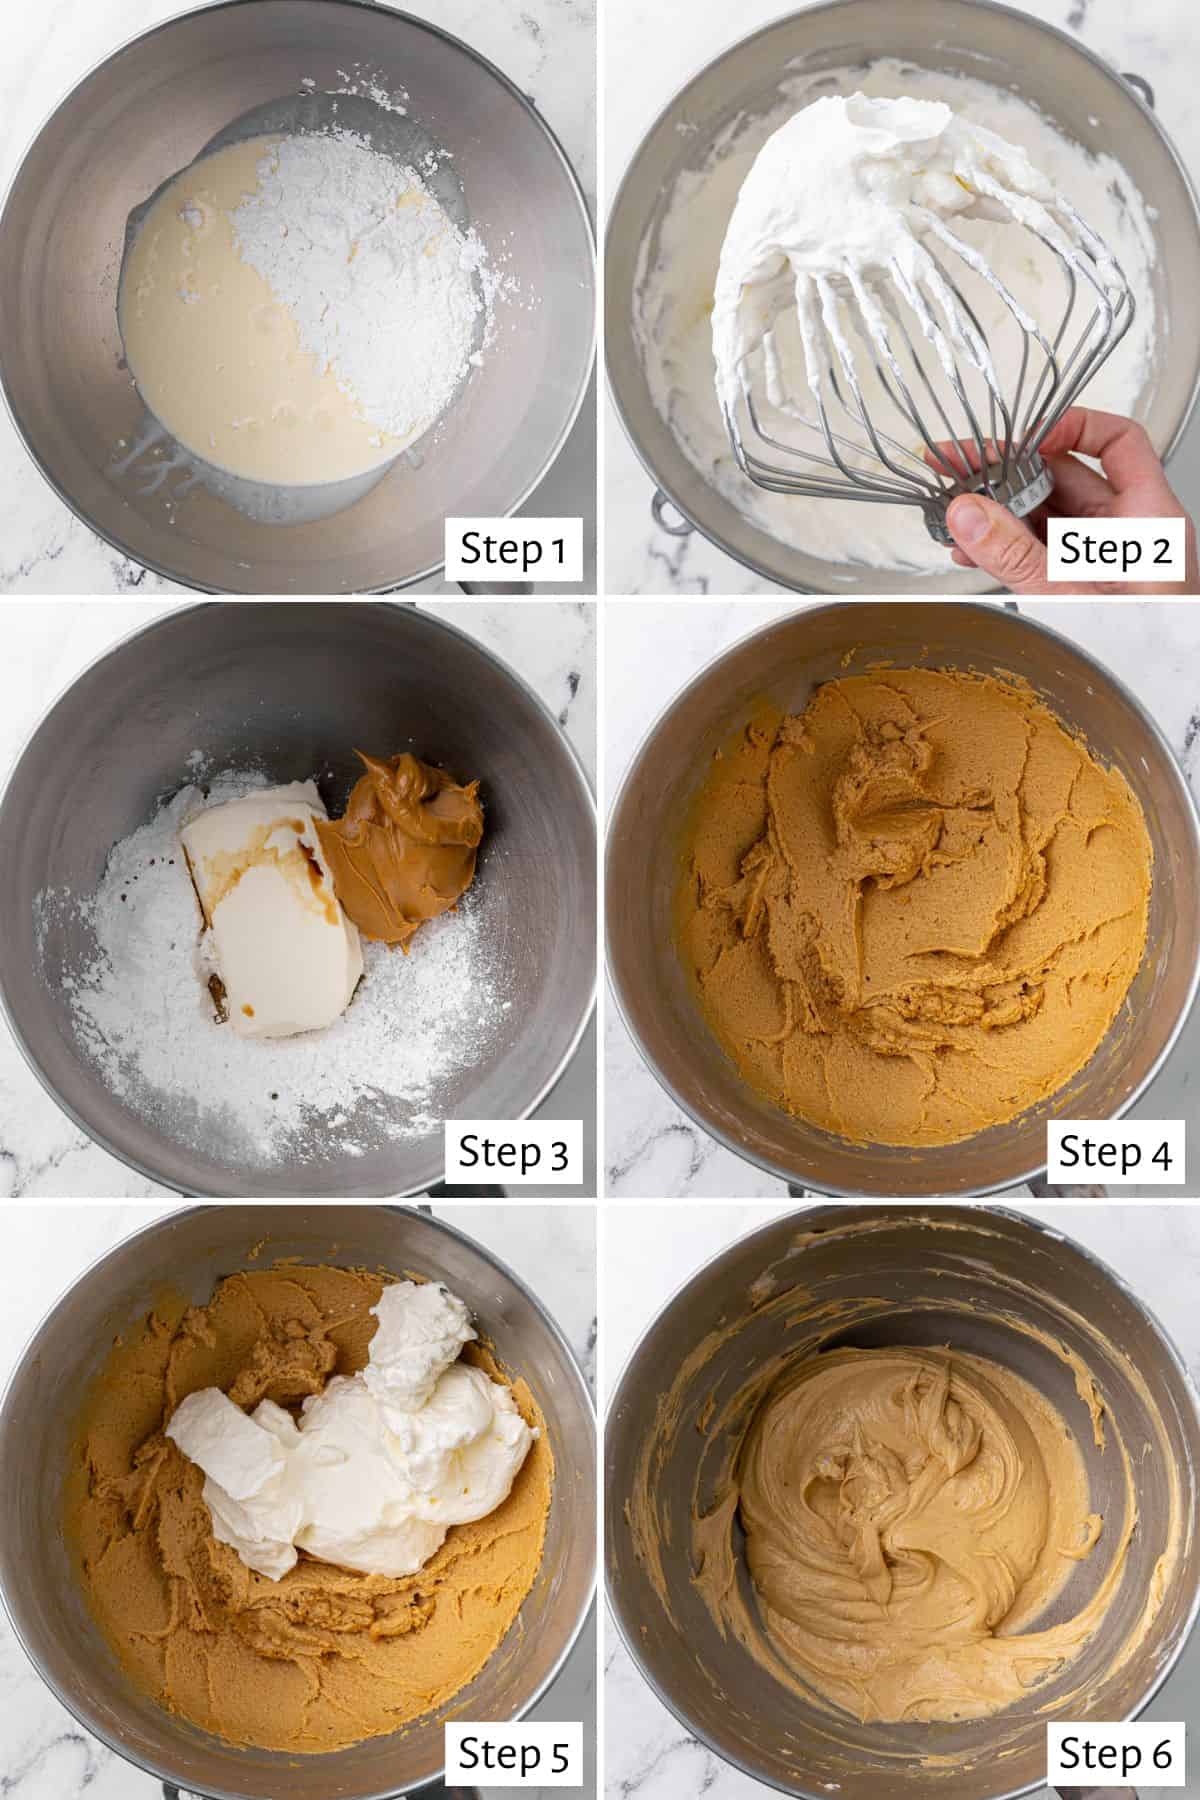 6-image collage making the recipe: 1 - Heavy cream and powdered sugar in the bowl of a stand mixer before mixing; 2 - After whipping whipped cream; 3 - Whipped cream removed and remaining powdered sugar, peanut butter, cream cheese, and vanilla added; 4 - After mixing until light and fluffy; 5 -Whipped cream added to peanut butter mixture before combining; 6 - After folding together in the stand mixer.